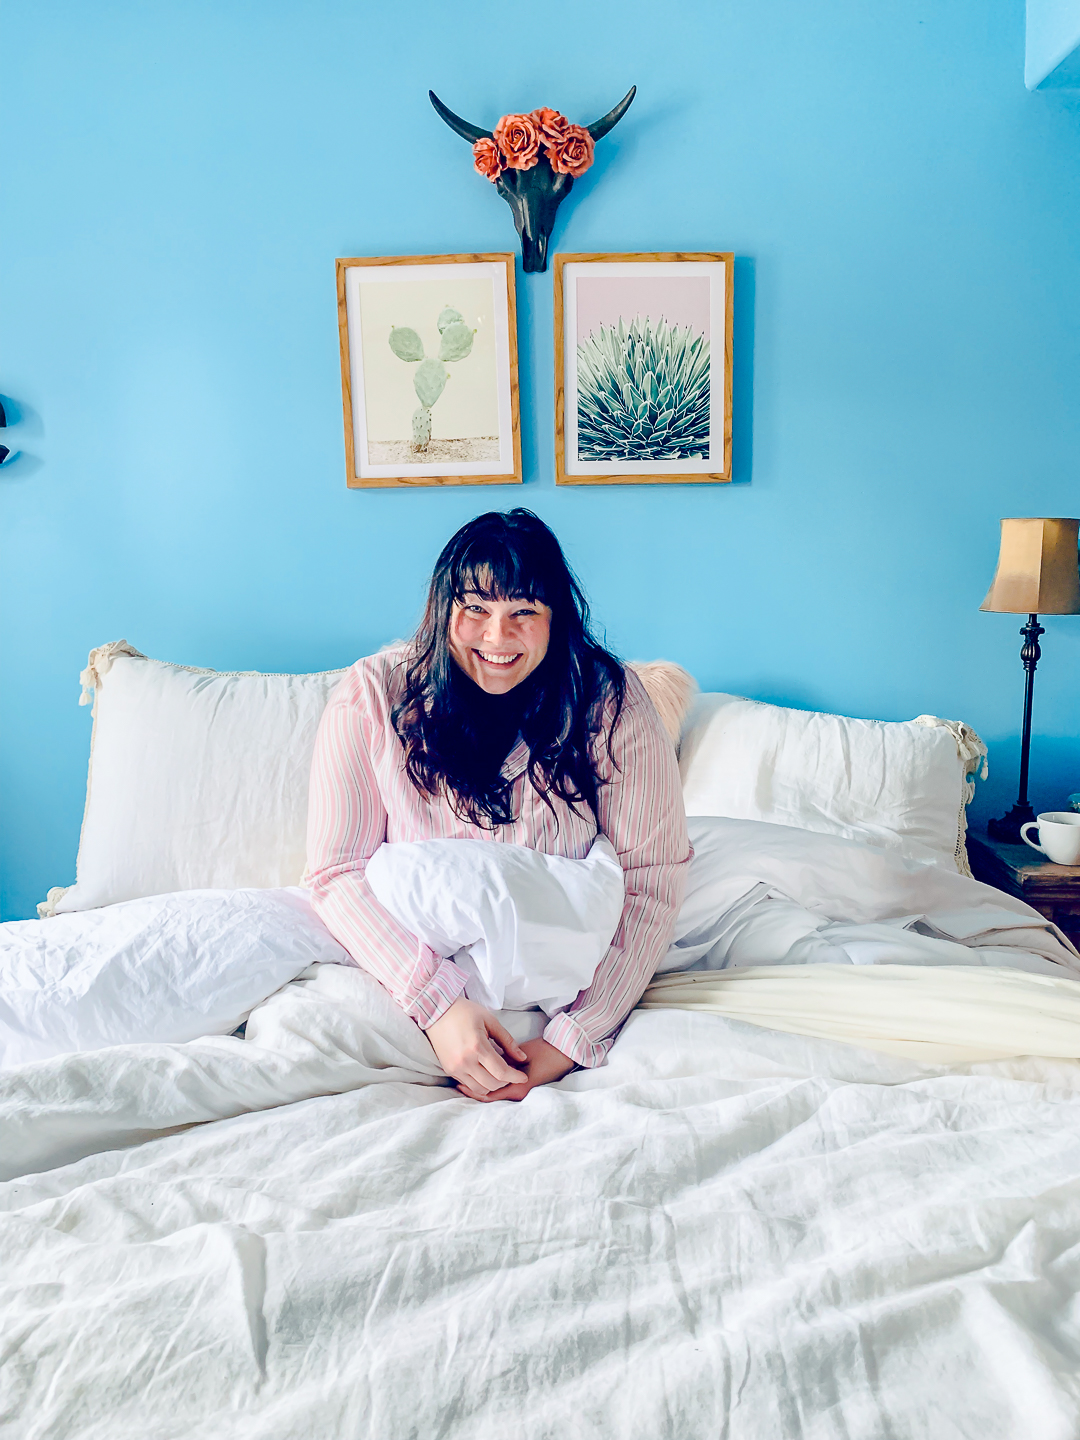 Plus Size Review of Big Fig Mattress